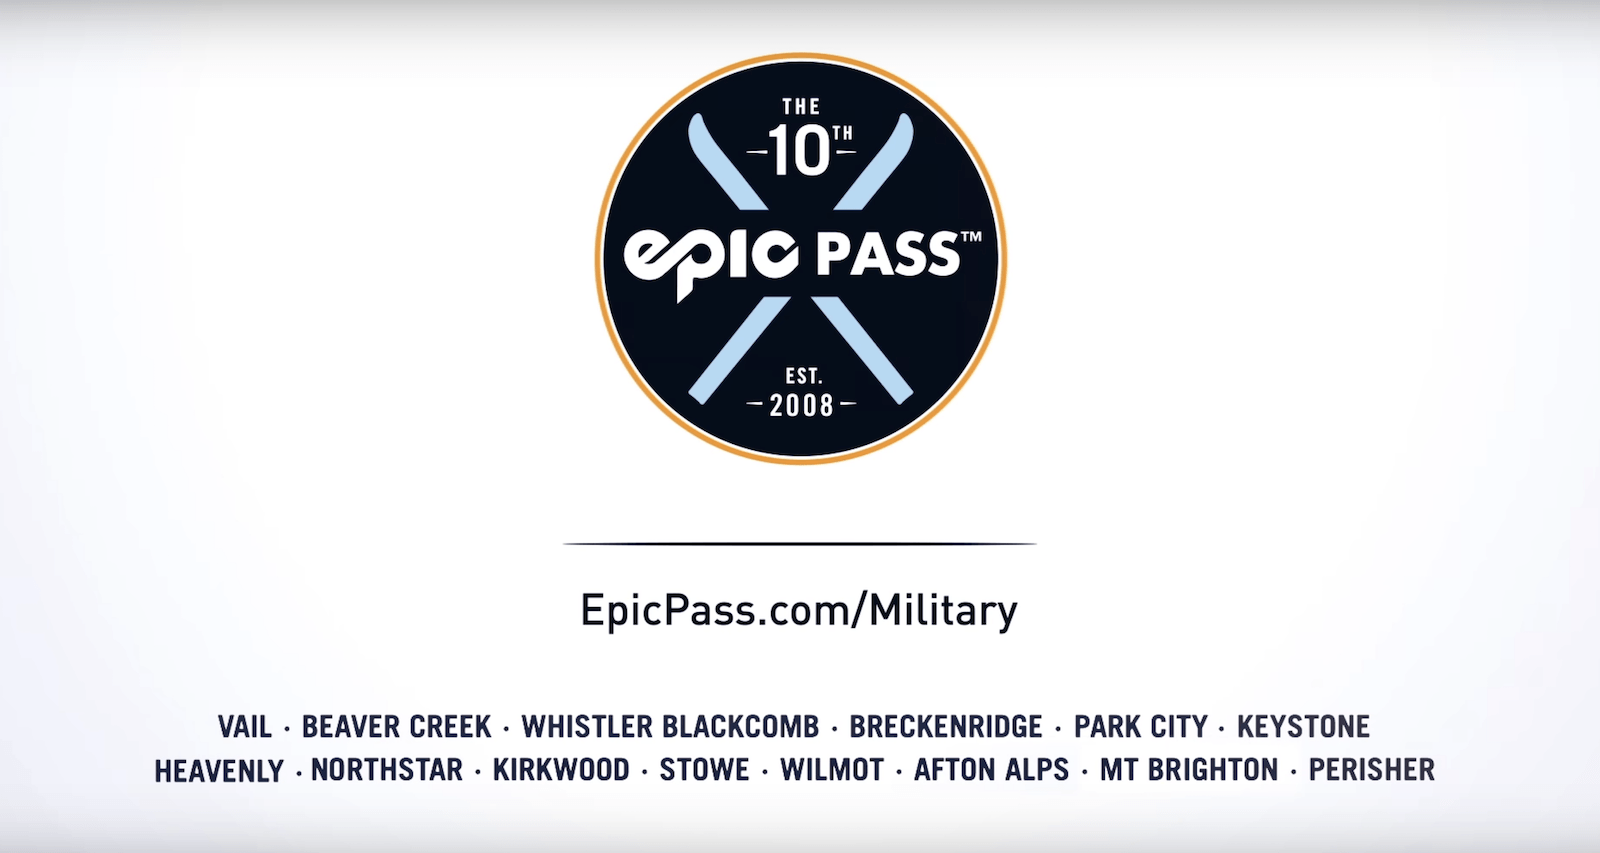 Epic Pass Logo - Vail Resorts Introduces $99 Military Epic Pass For The 2018 19